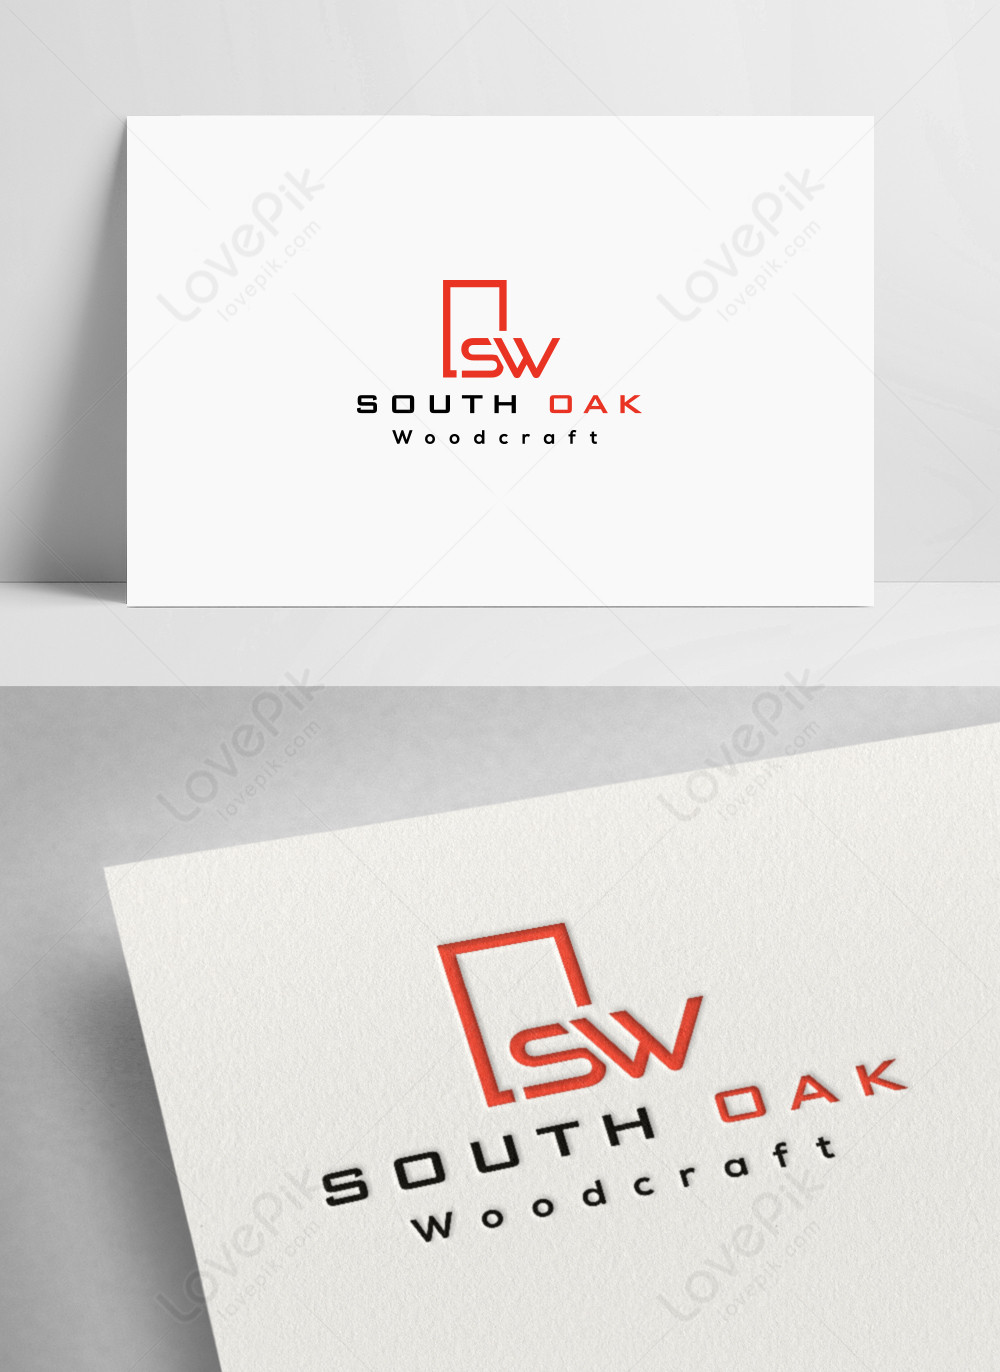 Rebranding: need an amazing new logo for an event ticketing company | Logo  design contest | 99designs